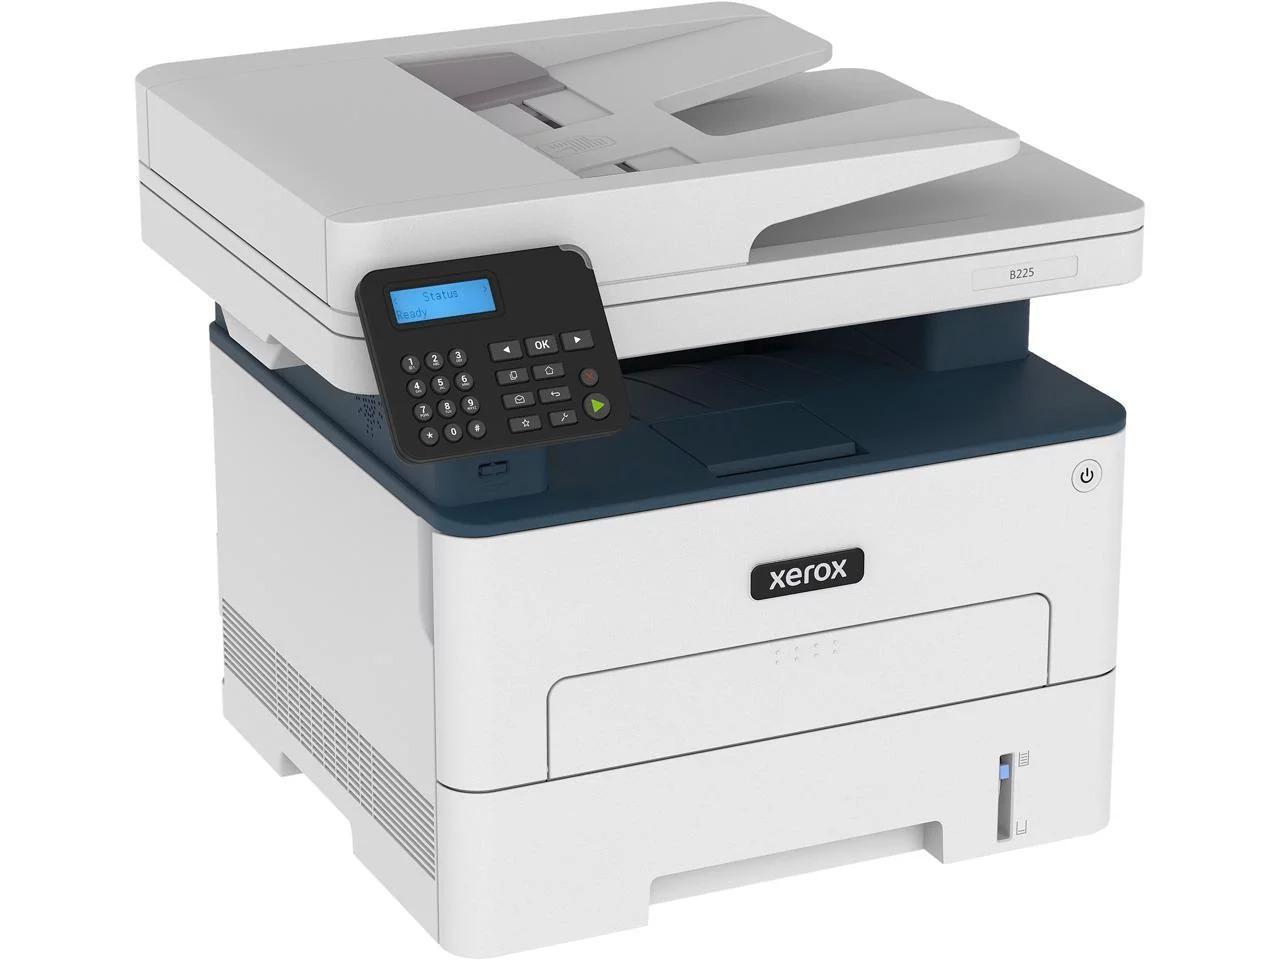 Xerox B225 Black and White All-In-One Laser Printer for $136.98 Shipped